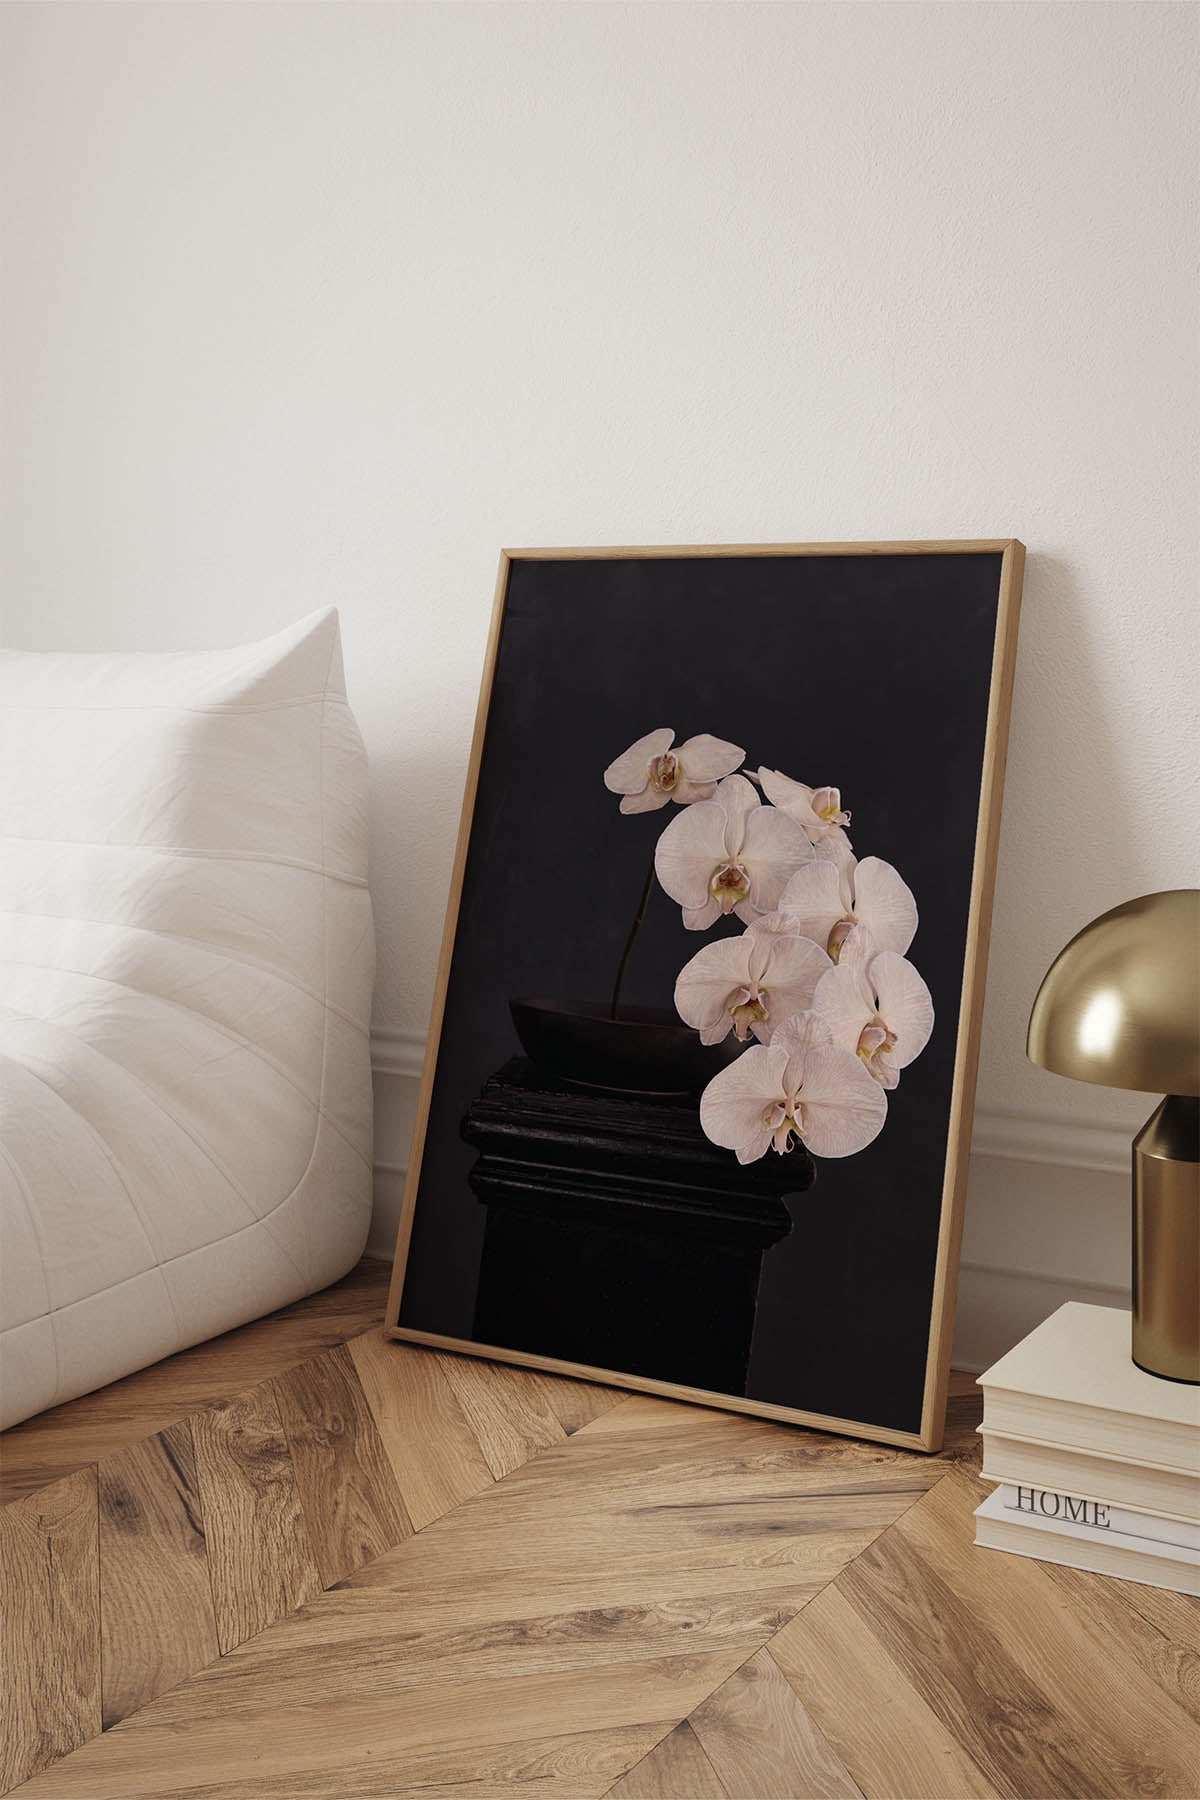 Fine Art Print Of A White Phaleanopsis Stem In A Black Bowl On A Black Mantle With A Black Rustic Background Leaning Against A Wall In A Living Room With A Linge Roset Chair 